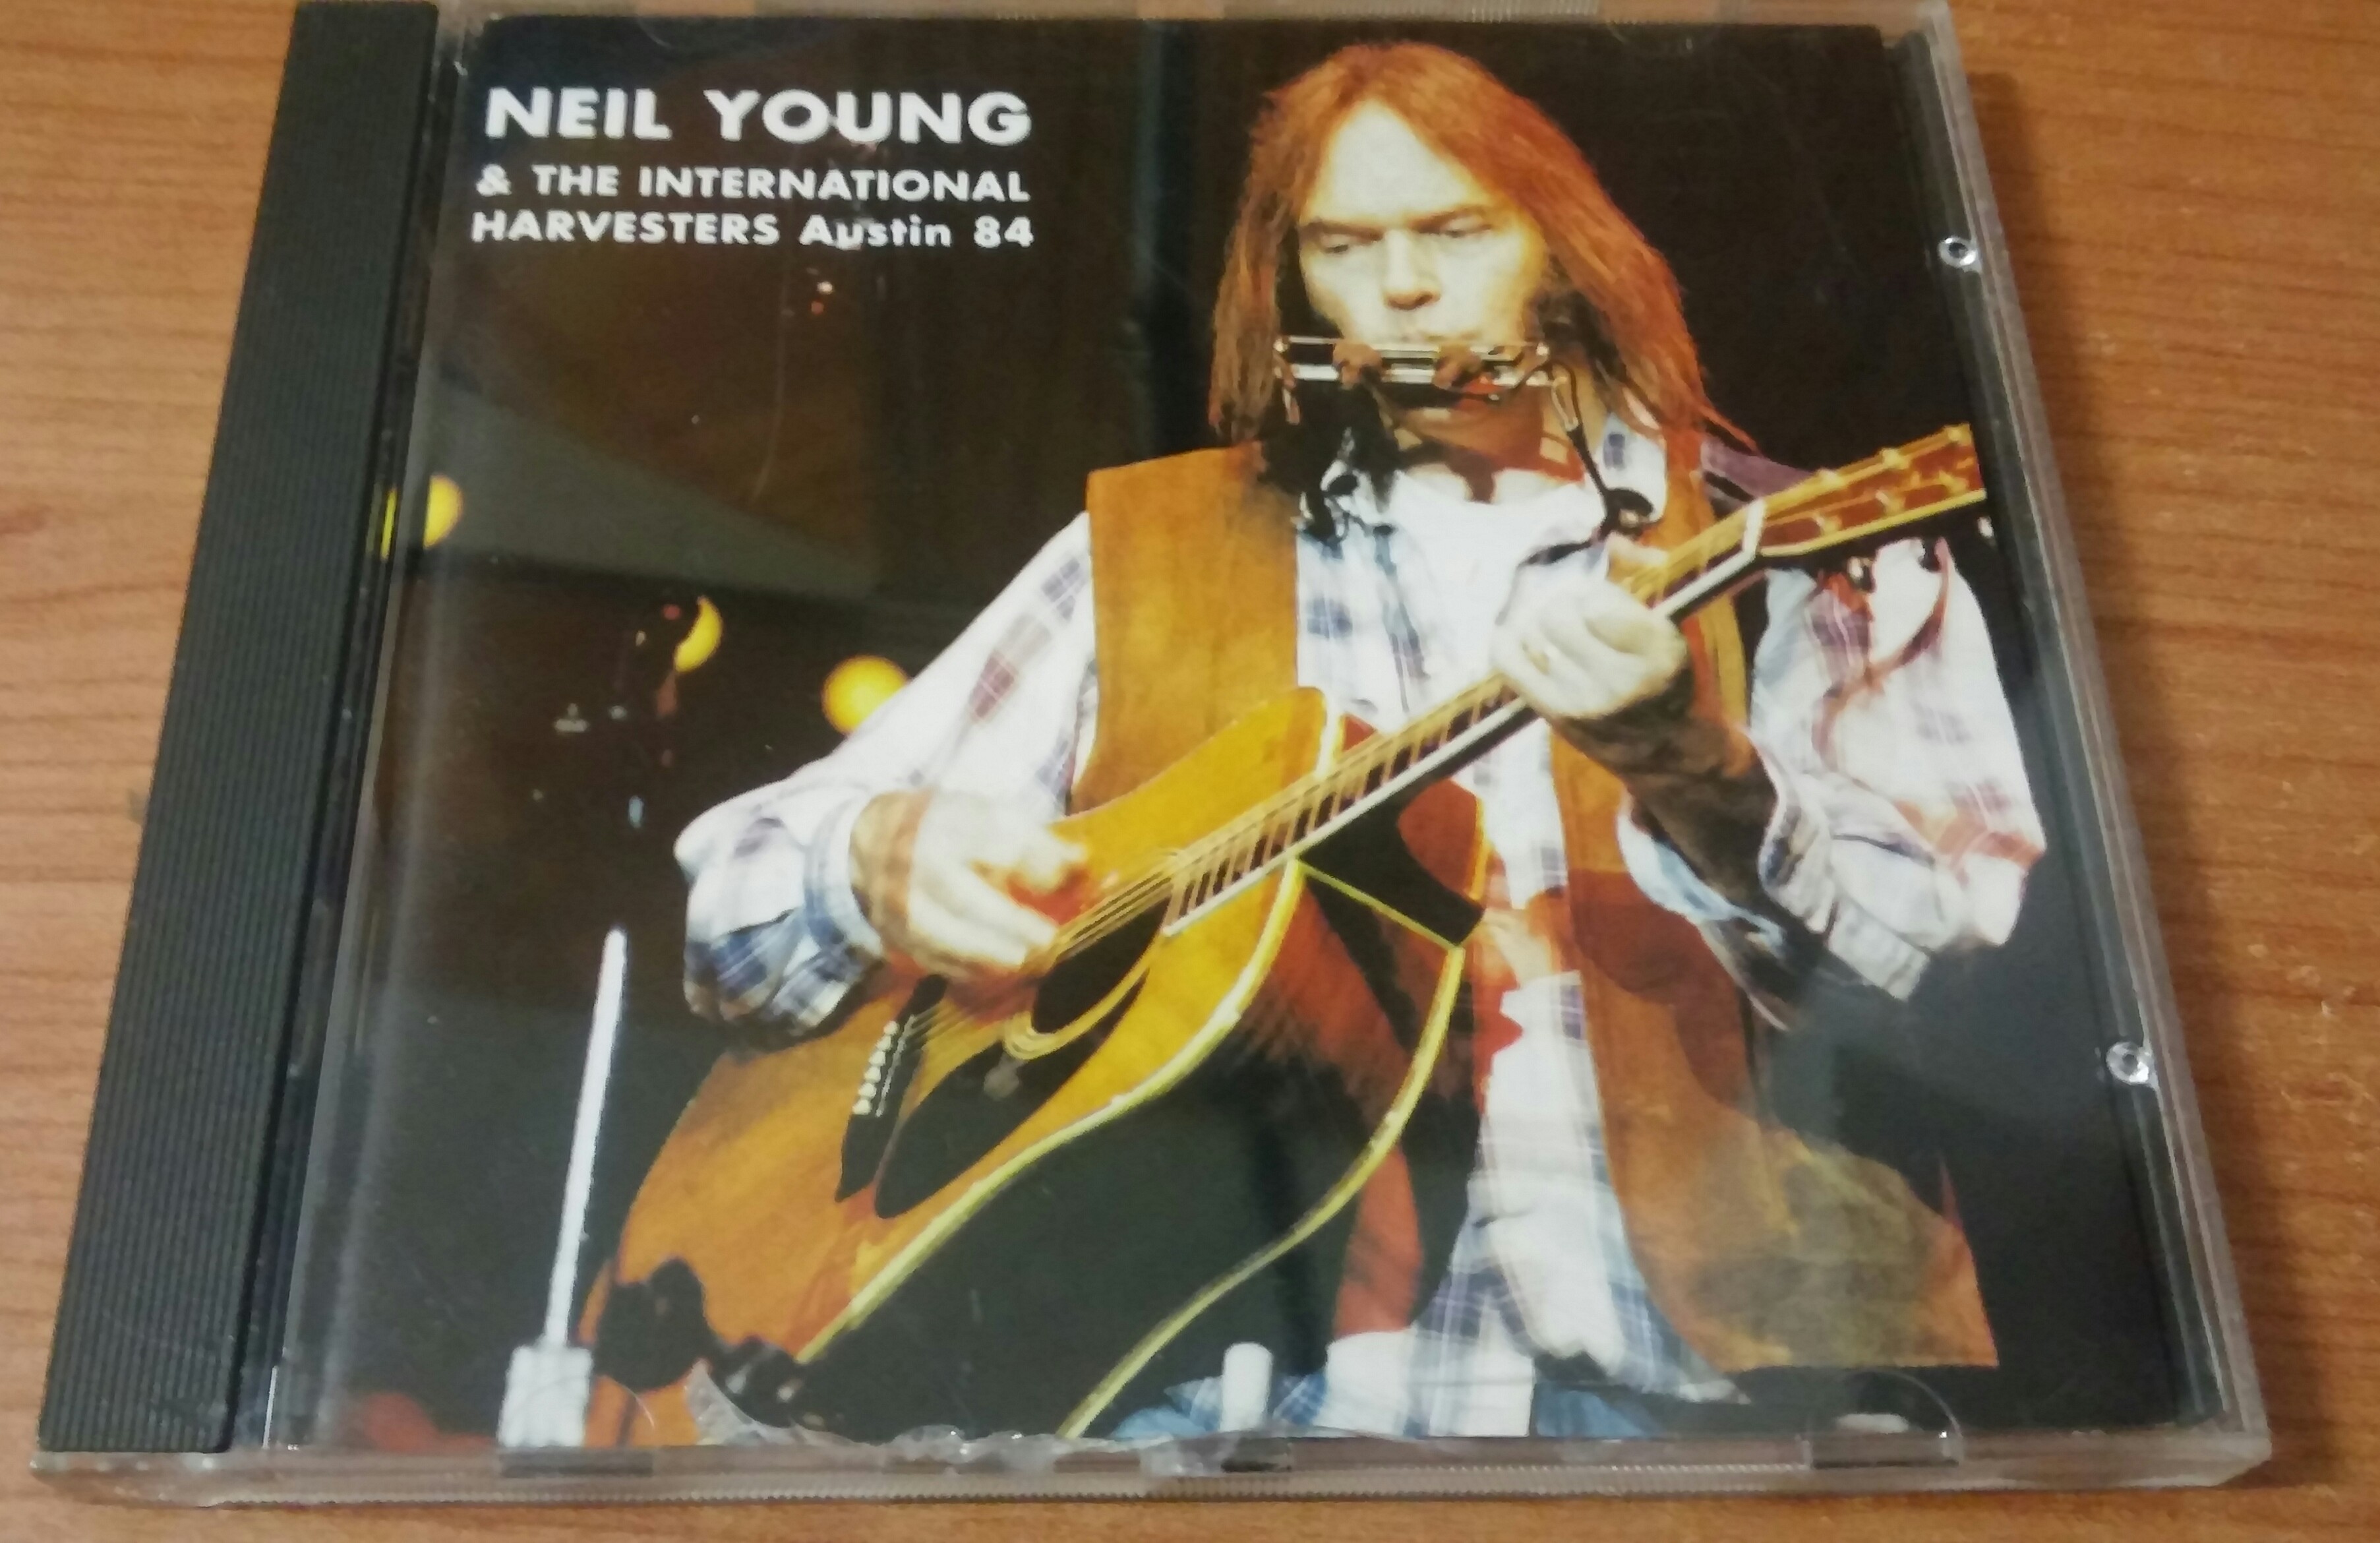 NEIL YOUNG  - NEIL YOUNG & THE INTERNATIONAL HARVESTERS Austin 84